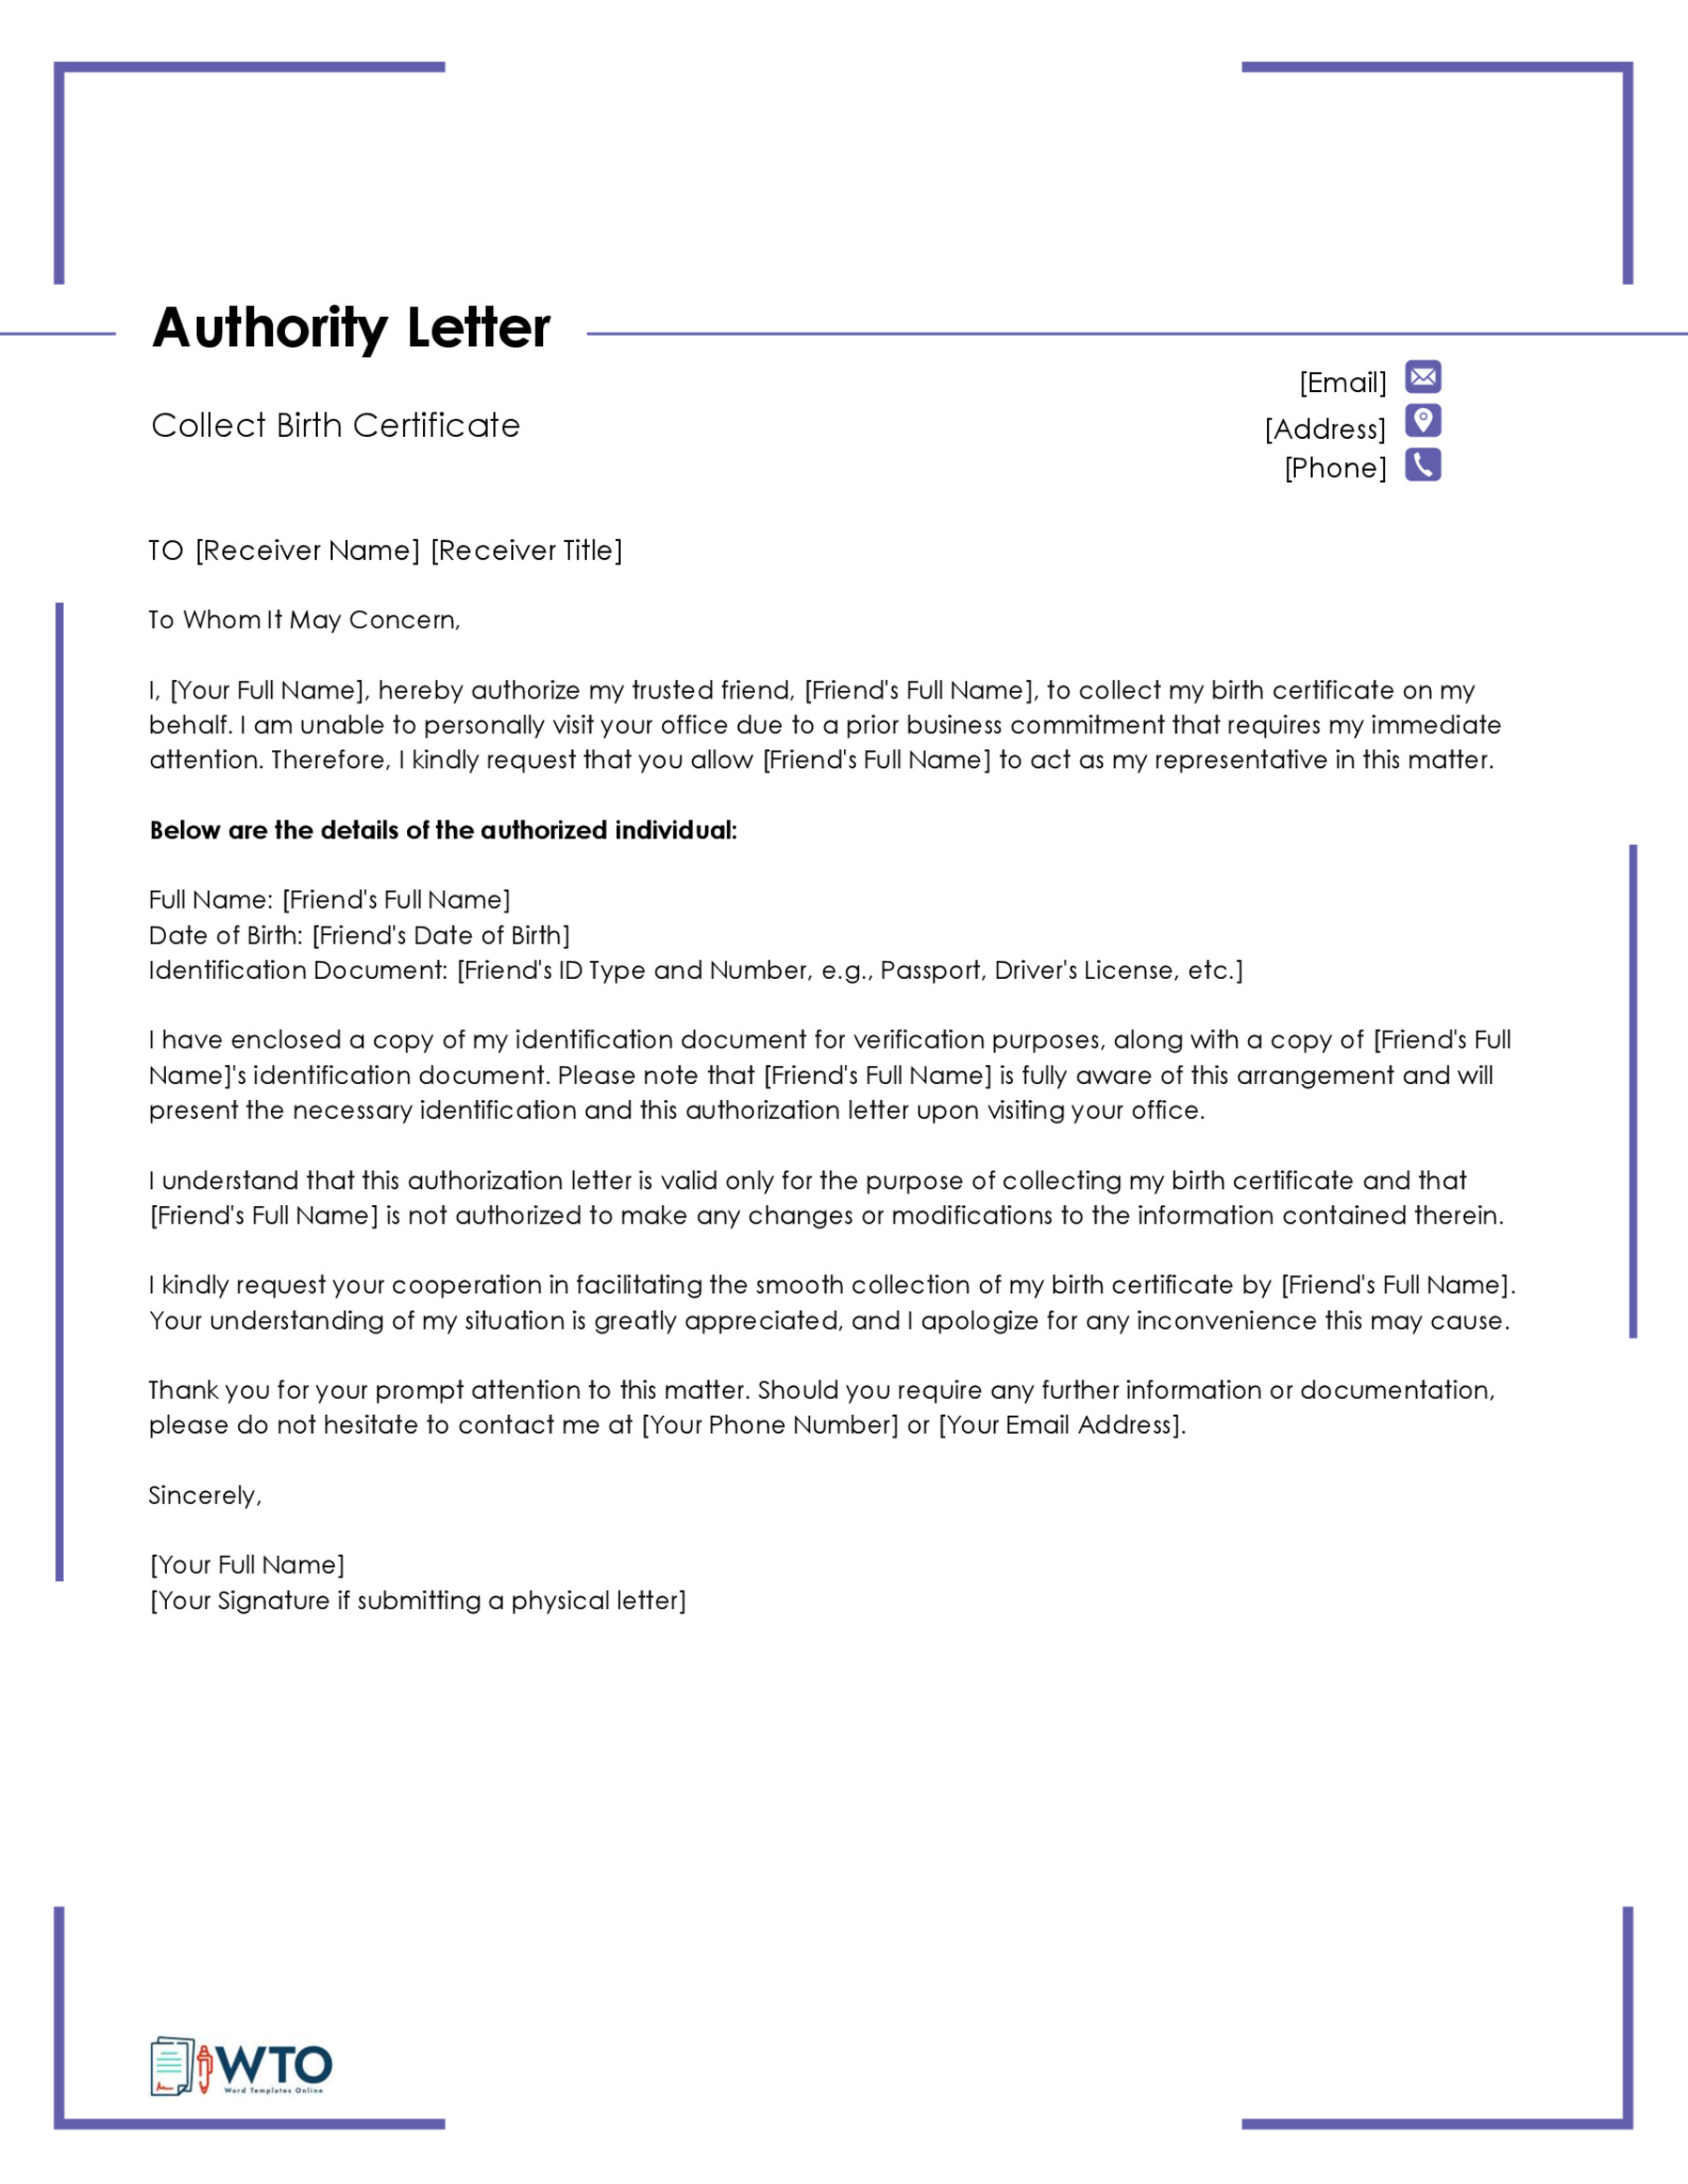 Authorization Letter for Claiming Birth Certificate Template-Ms Word Free Download